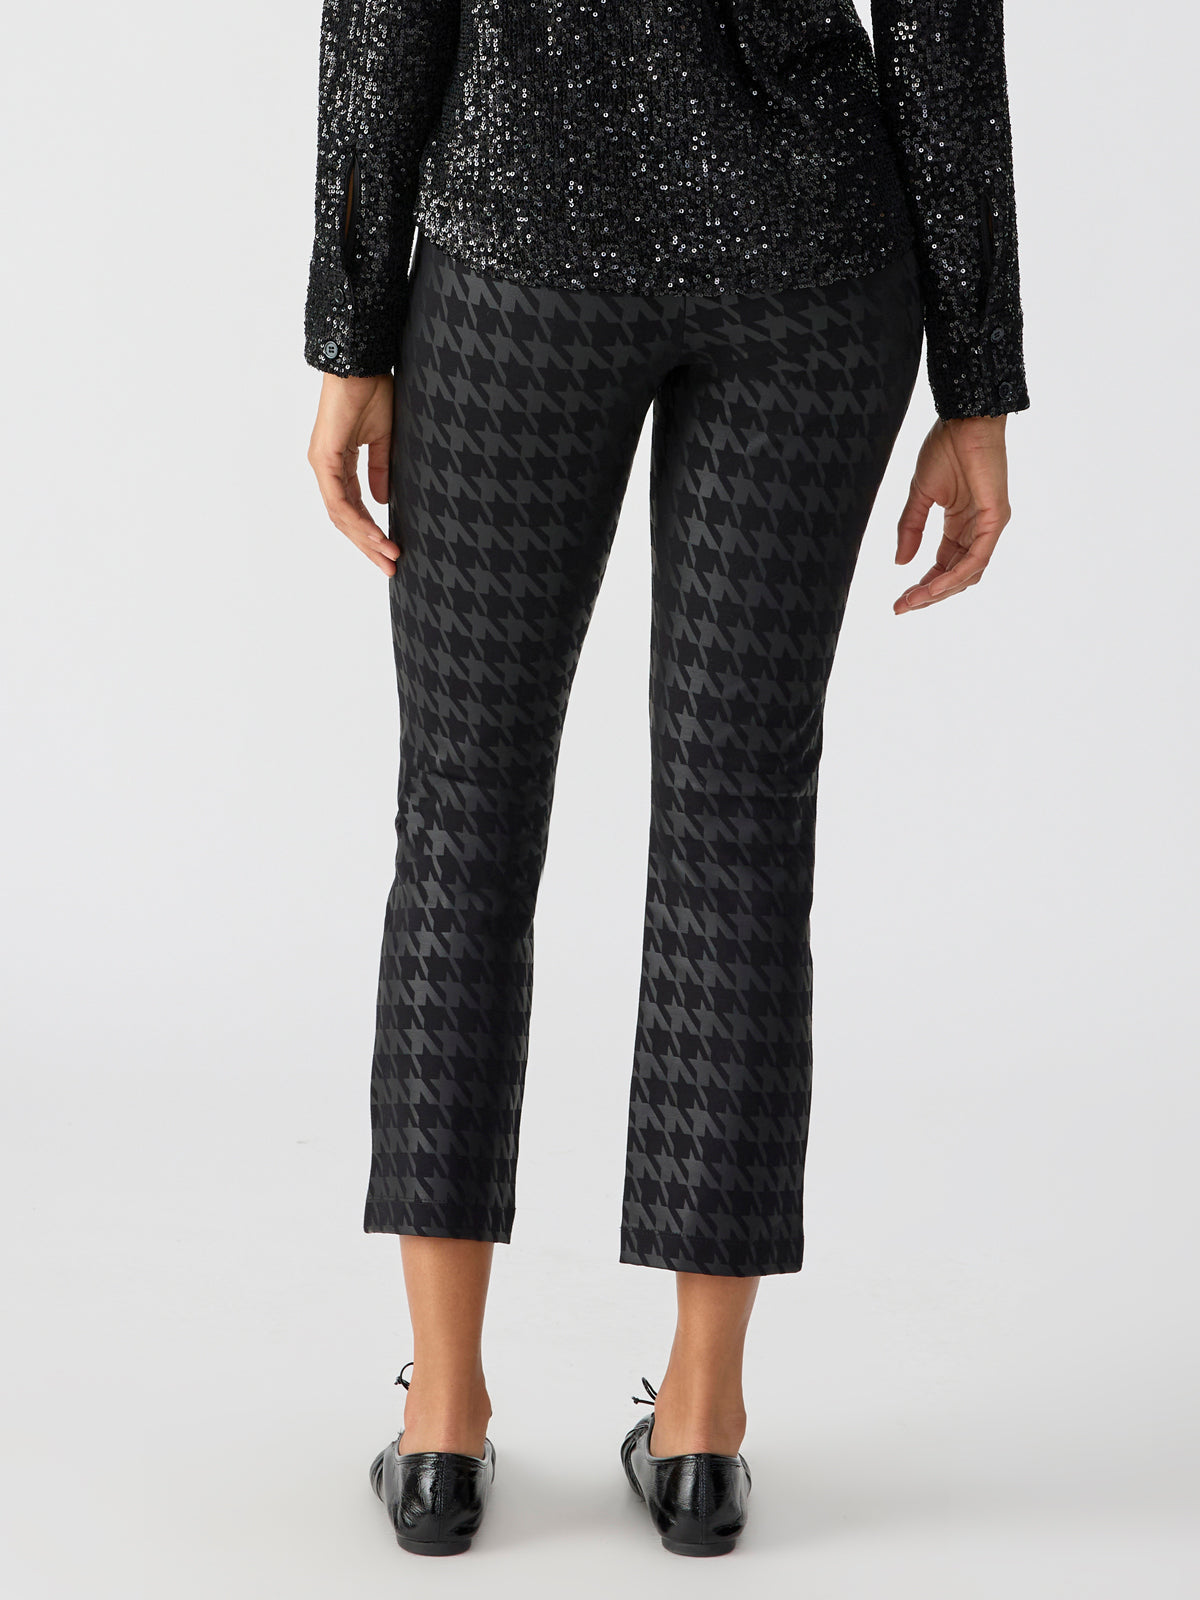 Carnaby Kick Crop Semi High Rise Legging Exploded Houndstooth